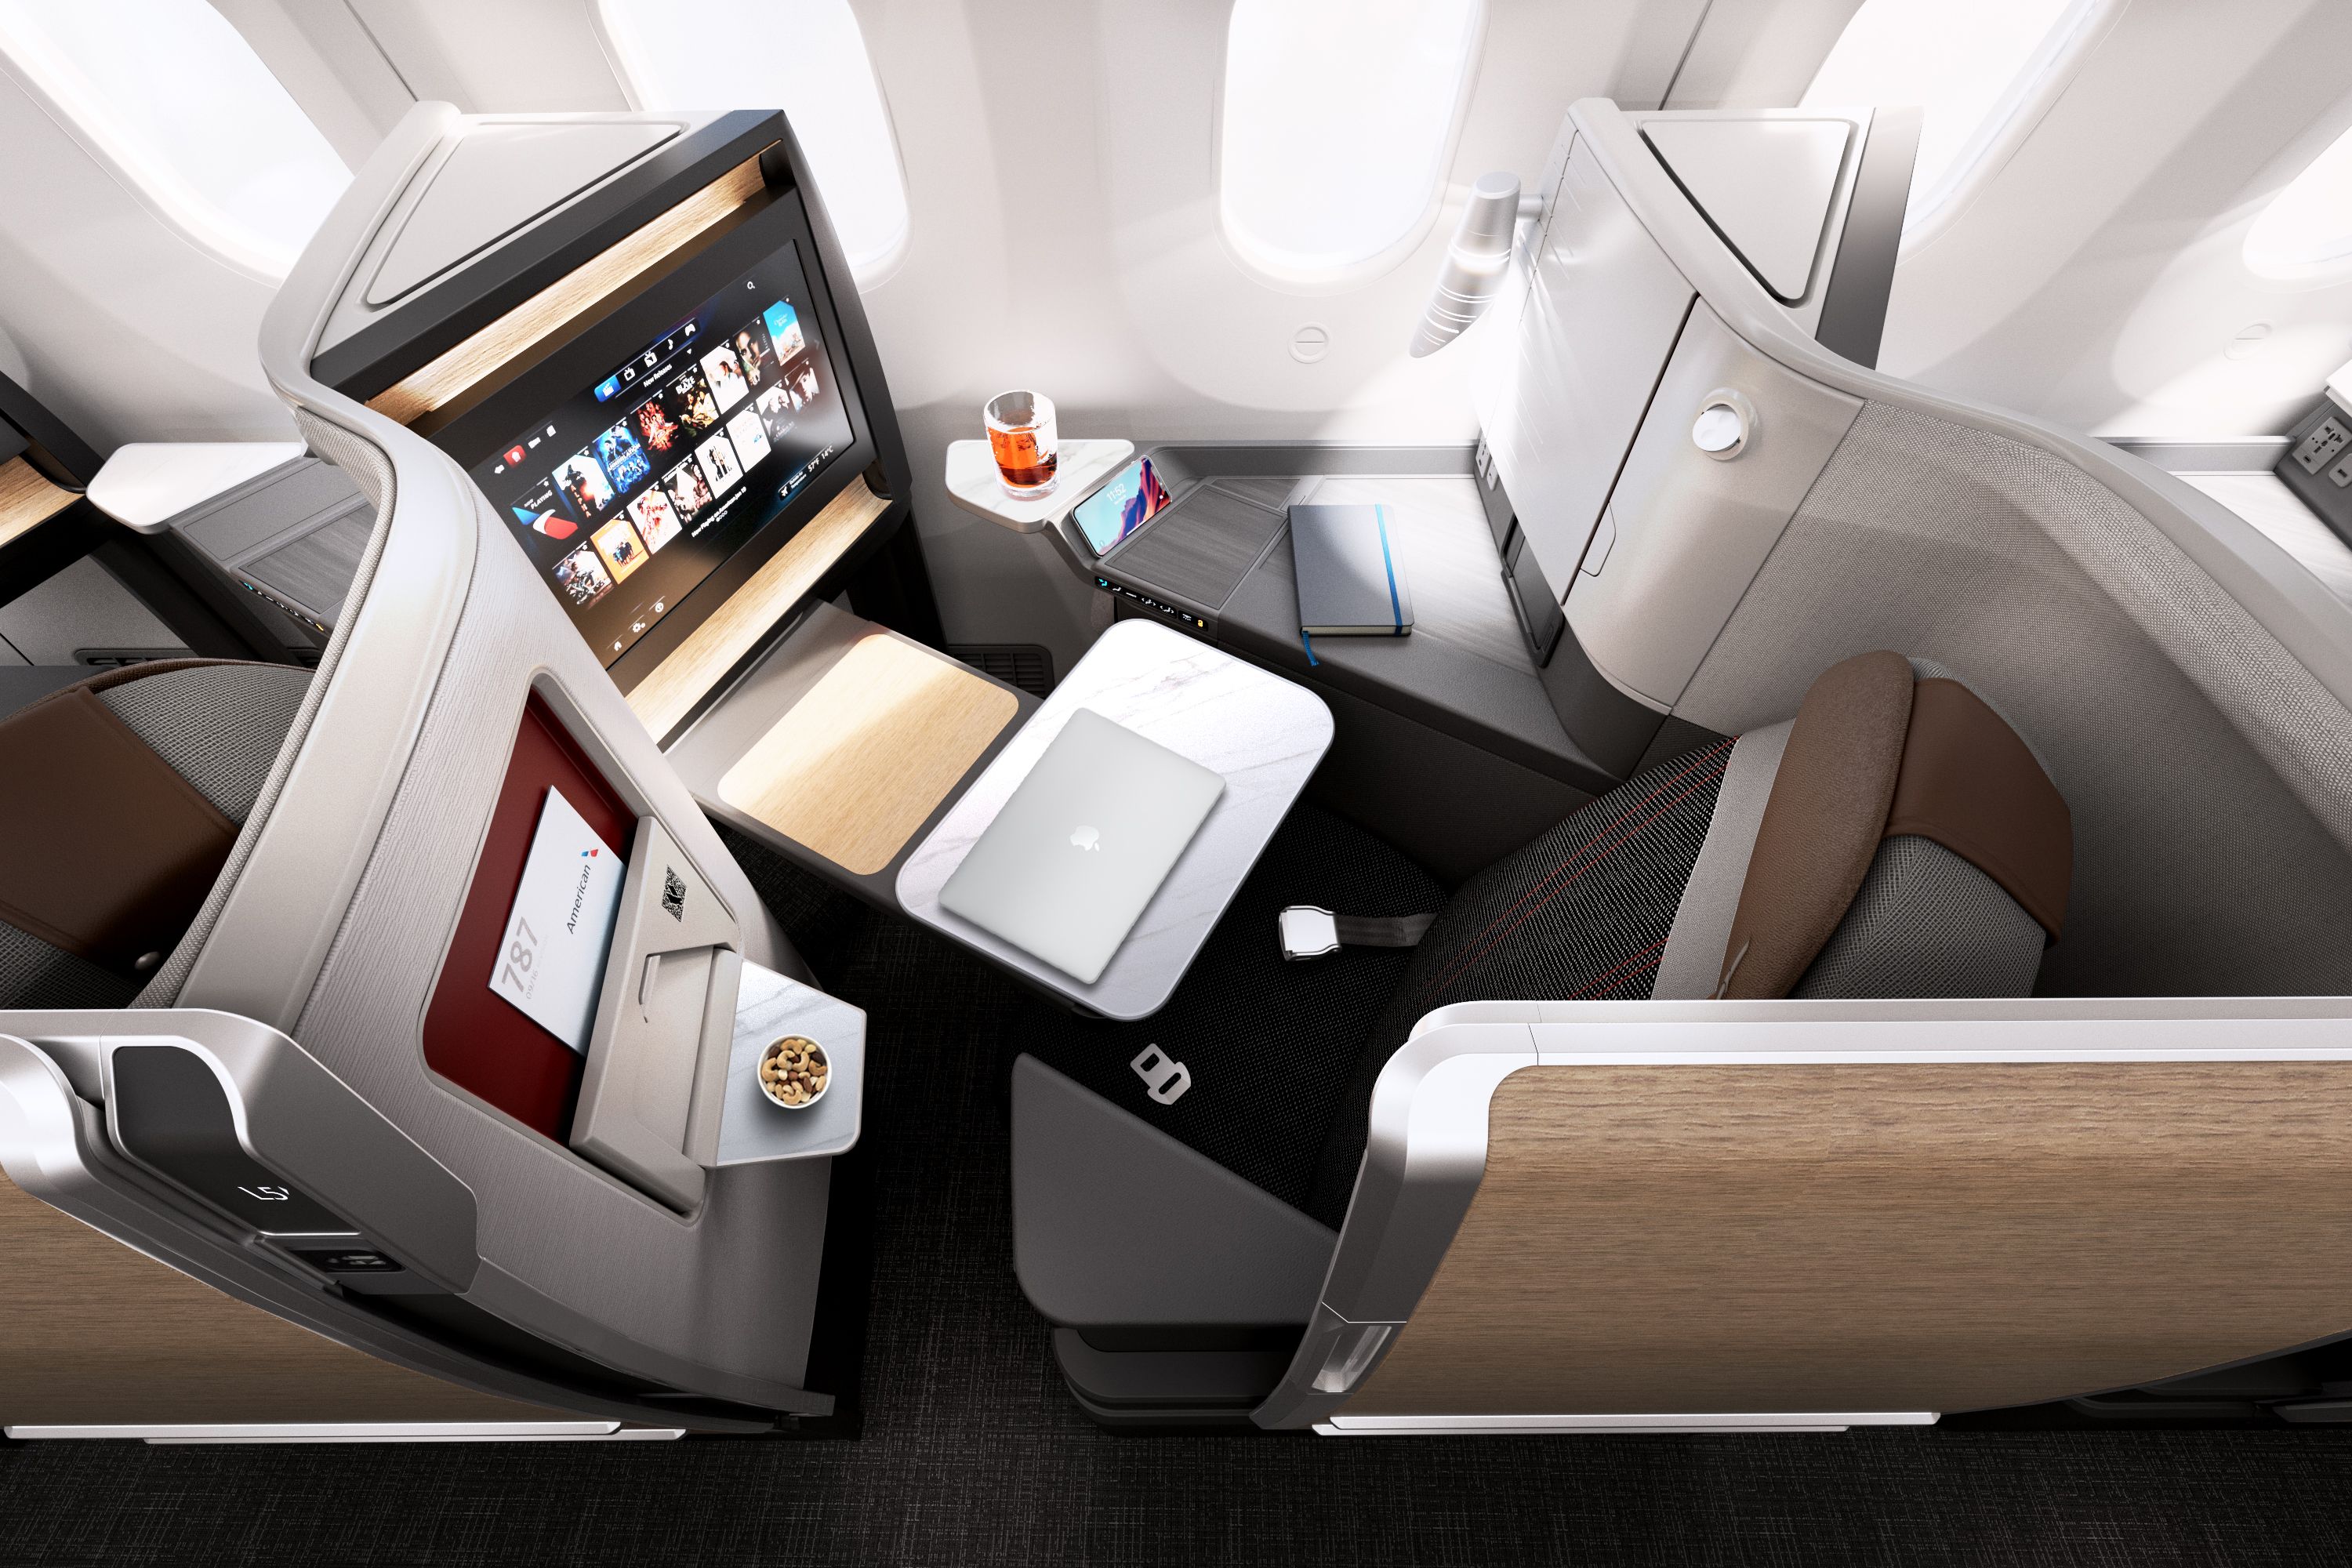 American Airlines Flagship Suite on the 787-9